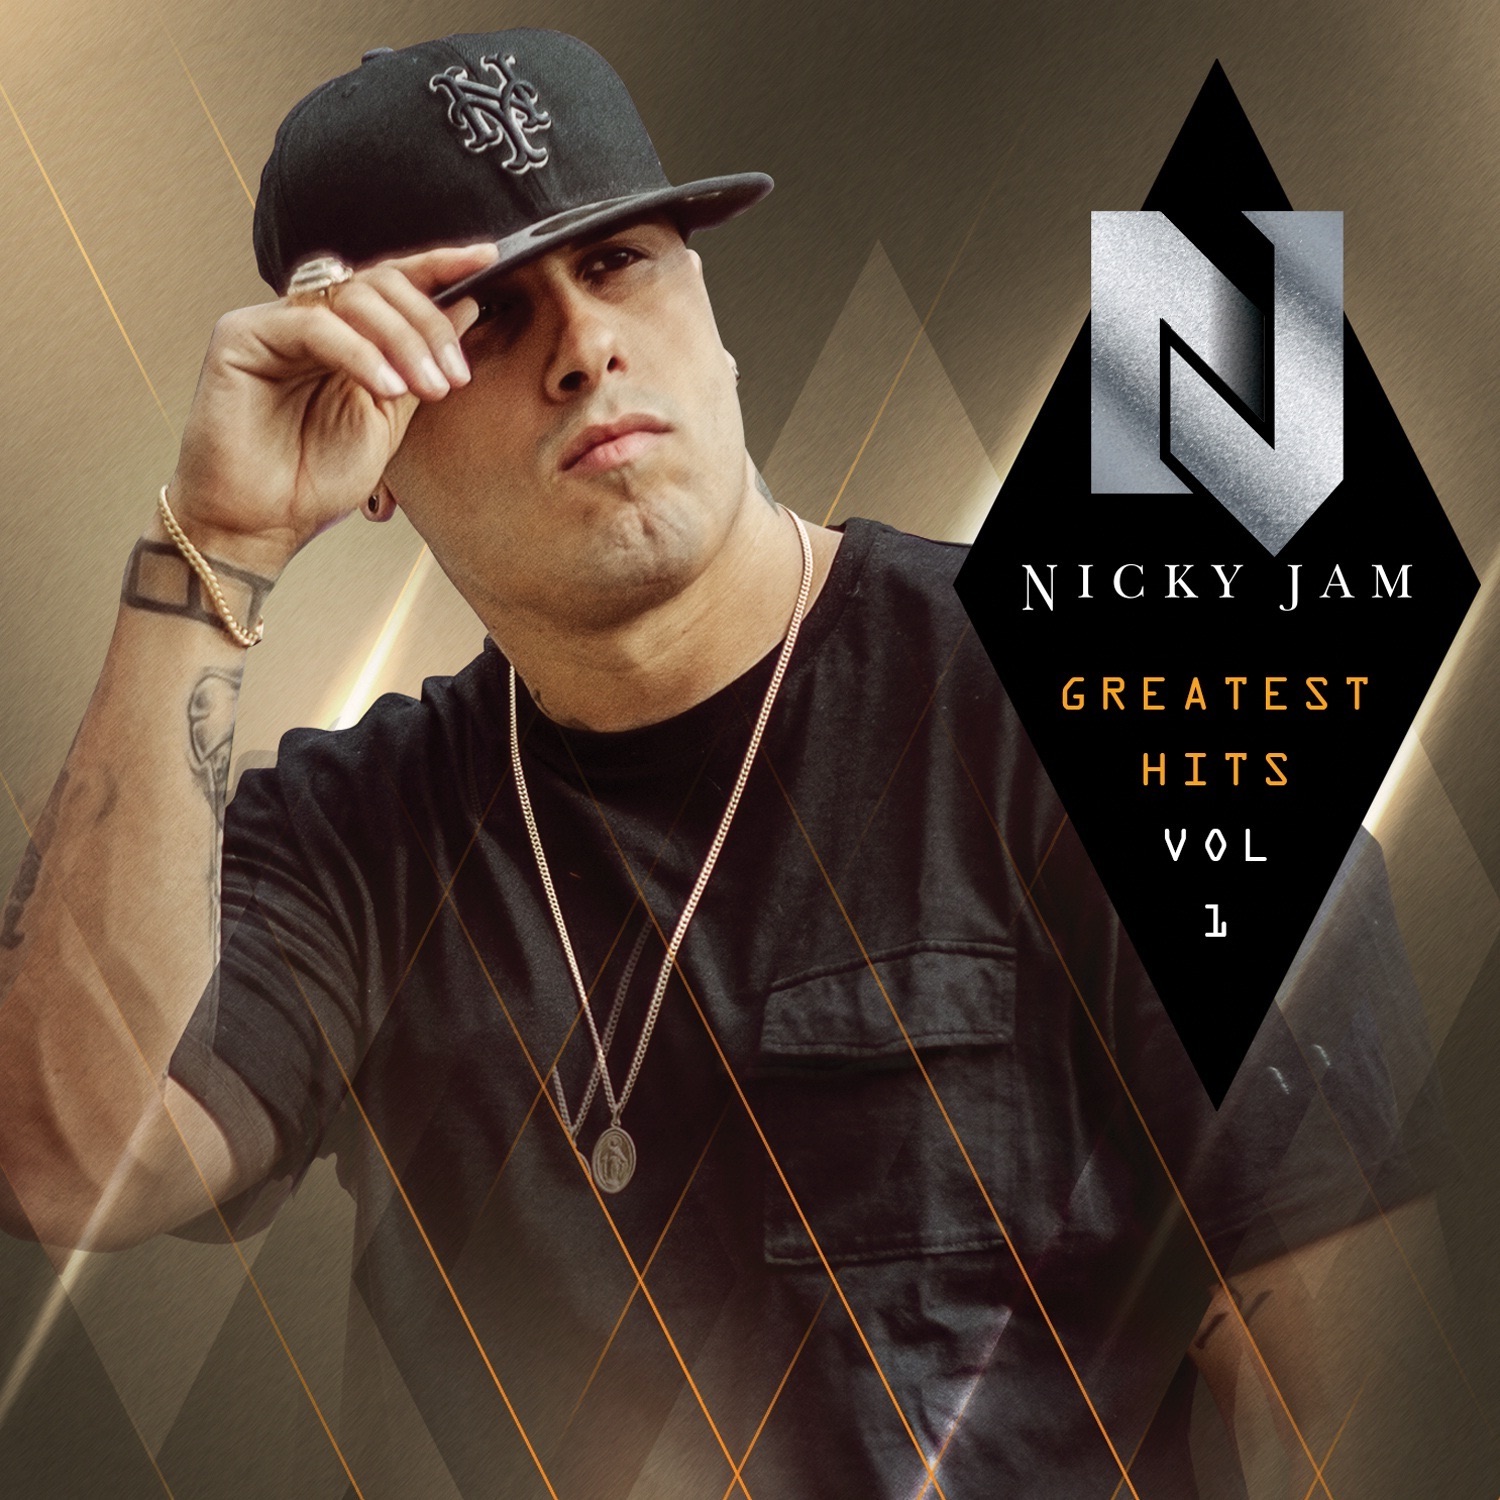 Greatest Hits Vol 1 by Nicky Jam on iTunes